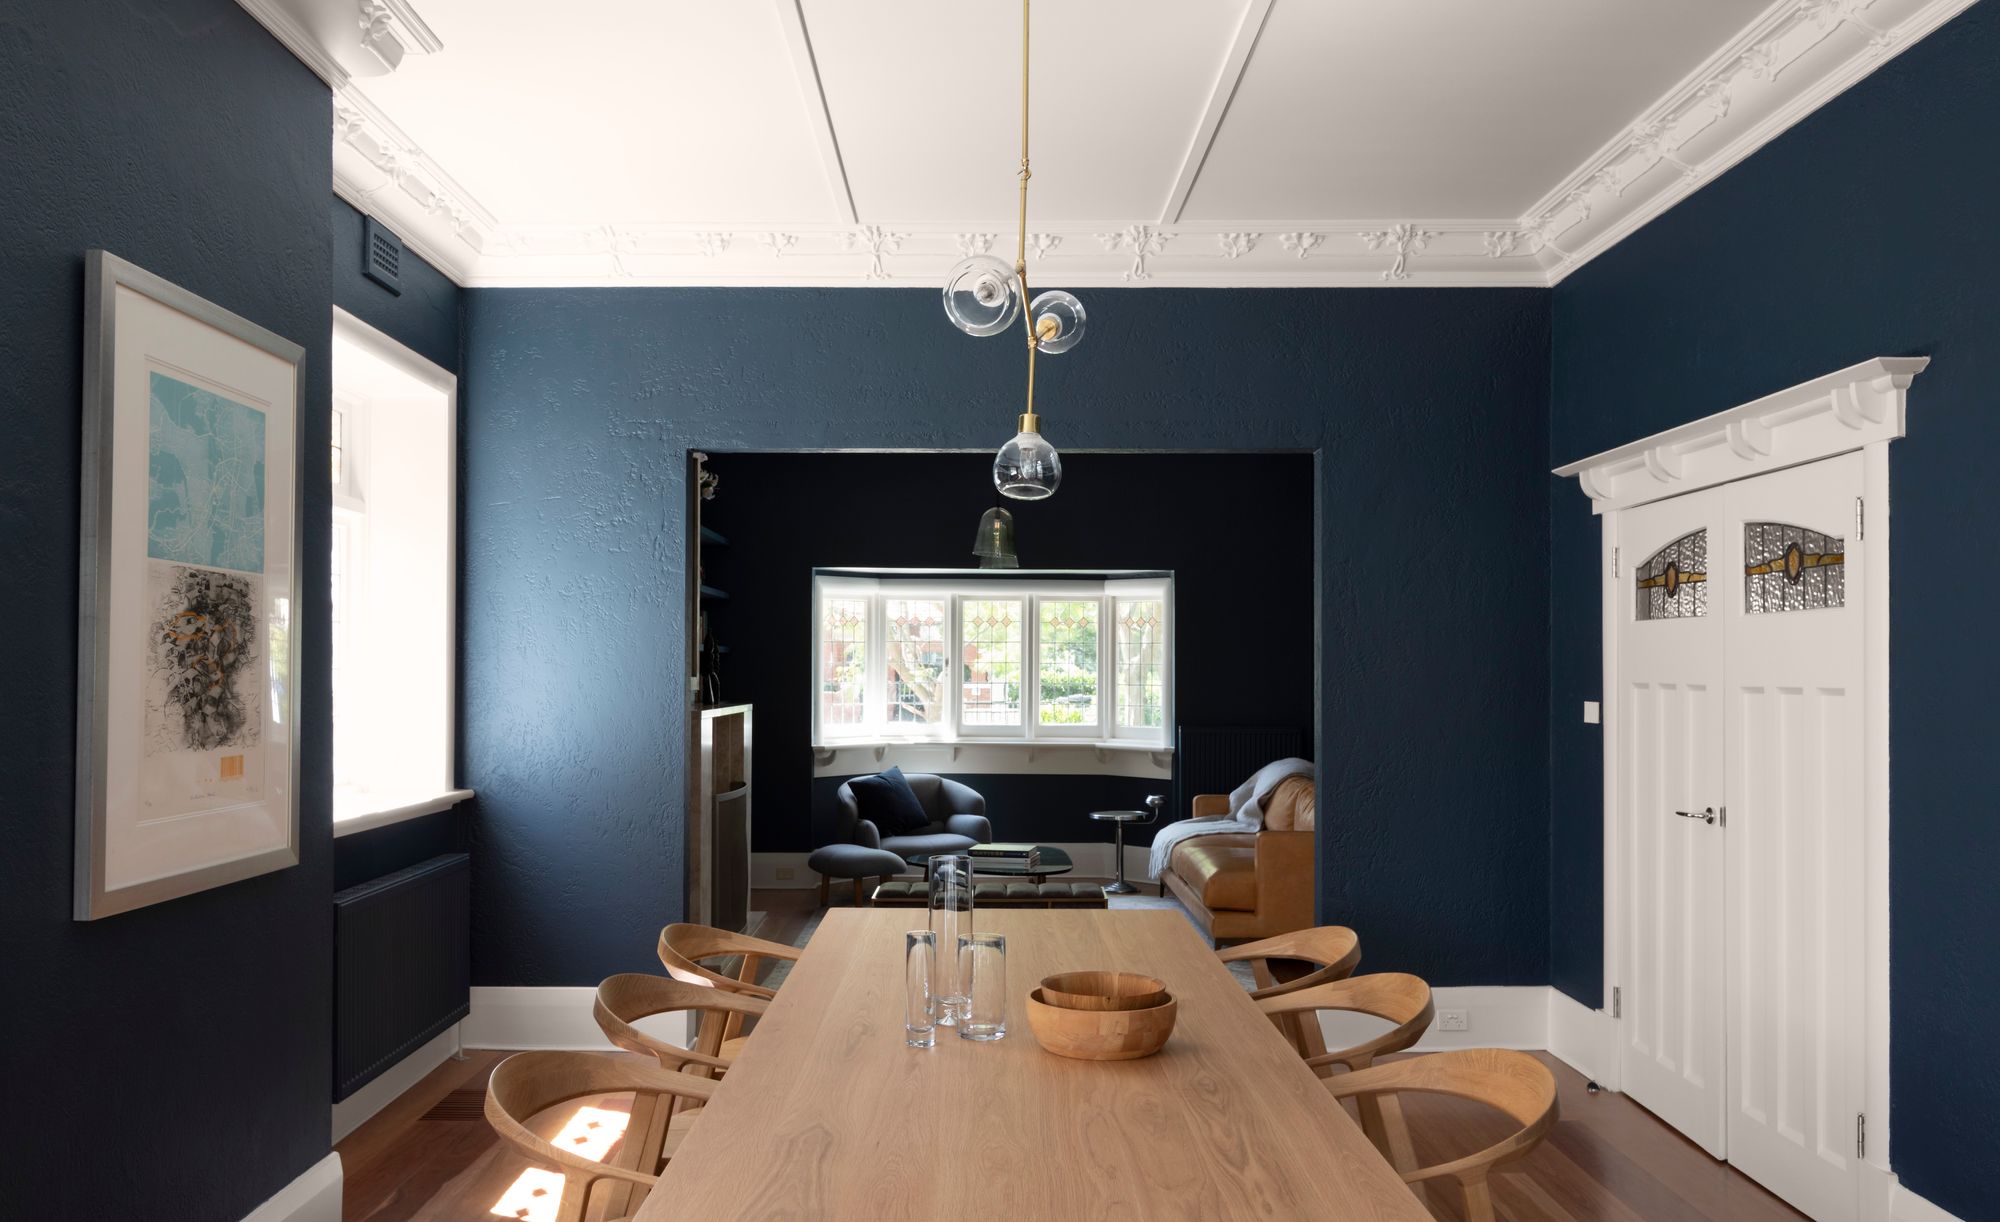 Elwood House by AM Architecture showing refurbished existing spaces with a dark blue paint colour